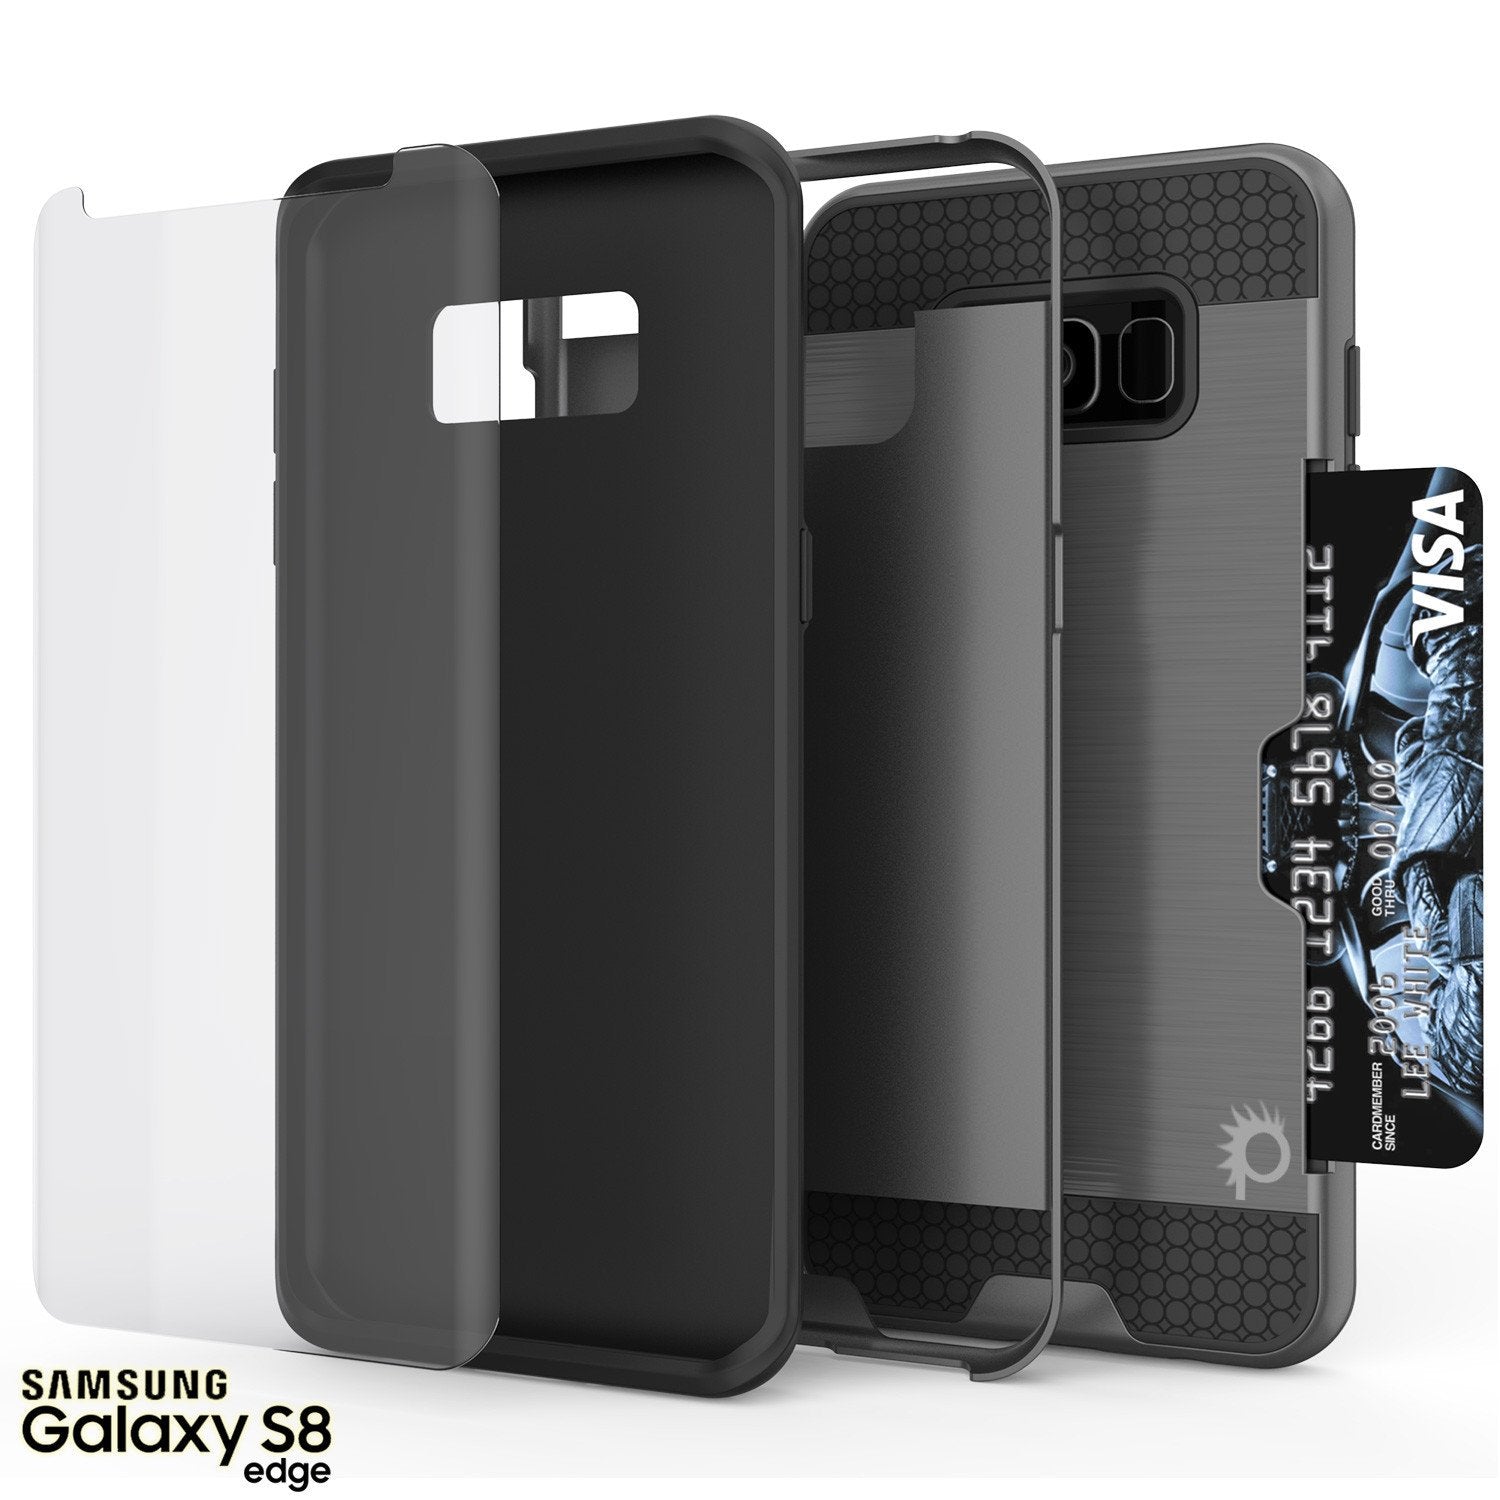 Galaxy S8 Case, PUNKcase [SLOT Series] [Slim Fit] Dual-Layer Armor Cover w/Integrated Anti-Shock System, Credit Card Slot & PUNKSHIELD Screen Protector for Samsung Galaxy S8[Grey] - PunkCase NZ